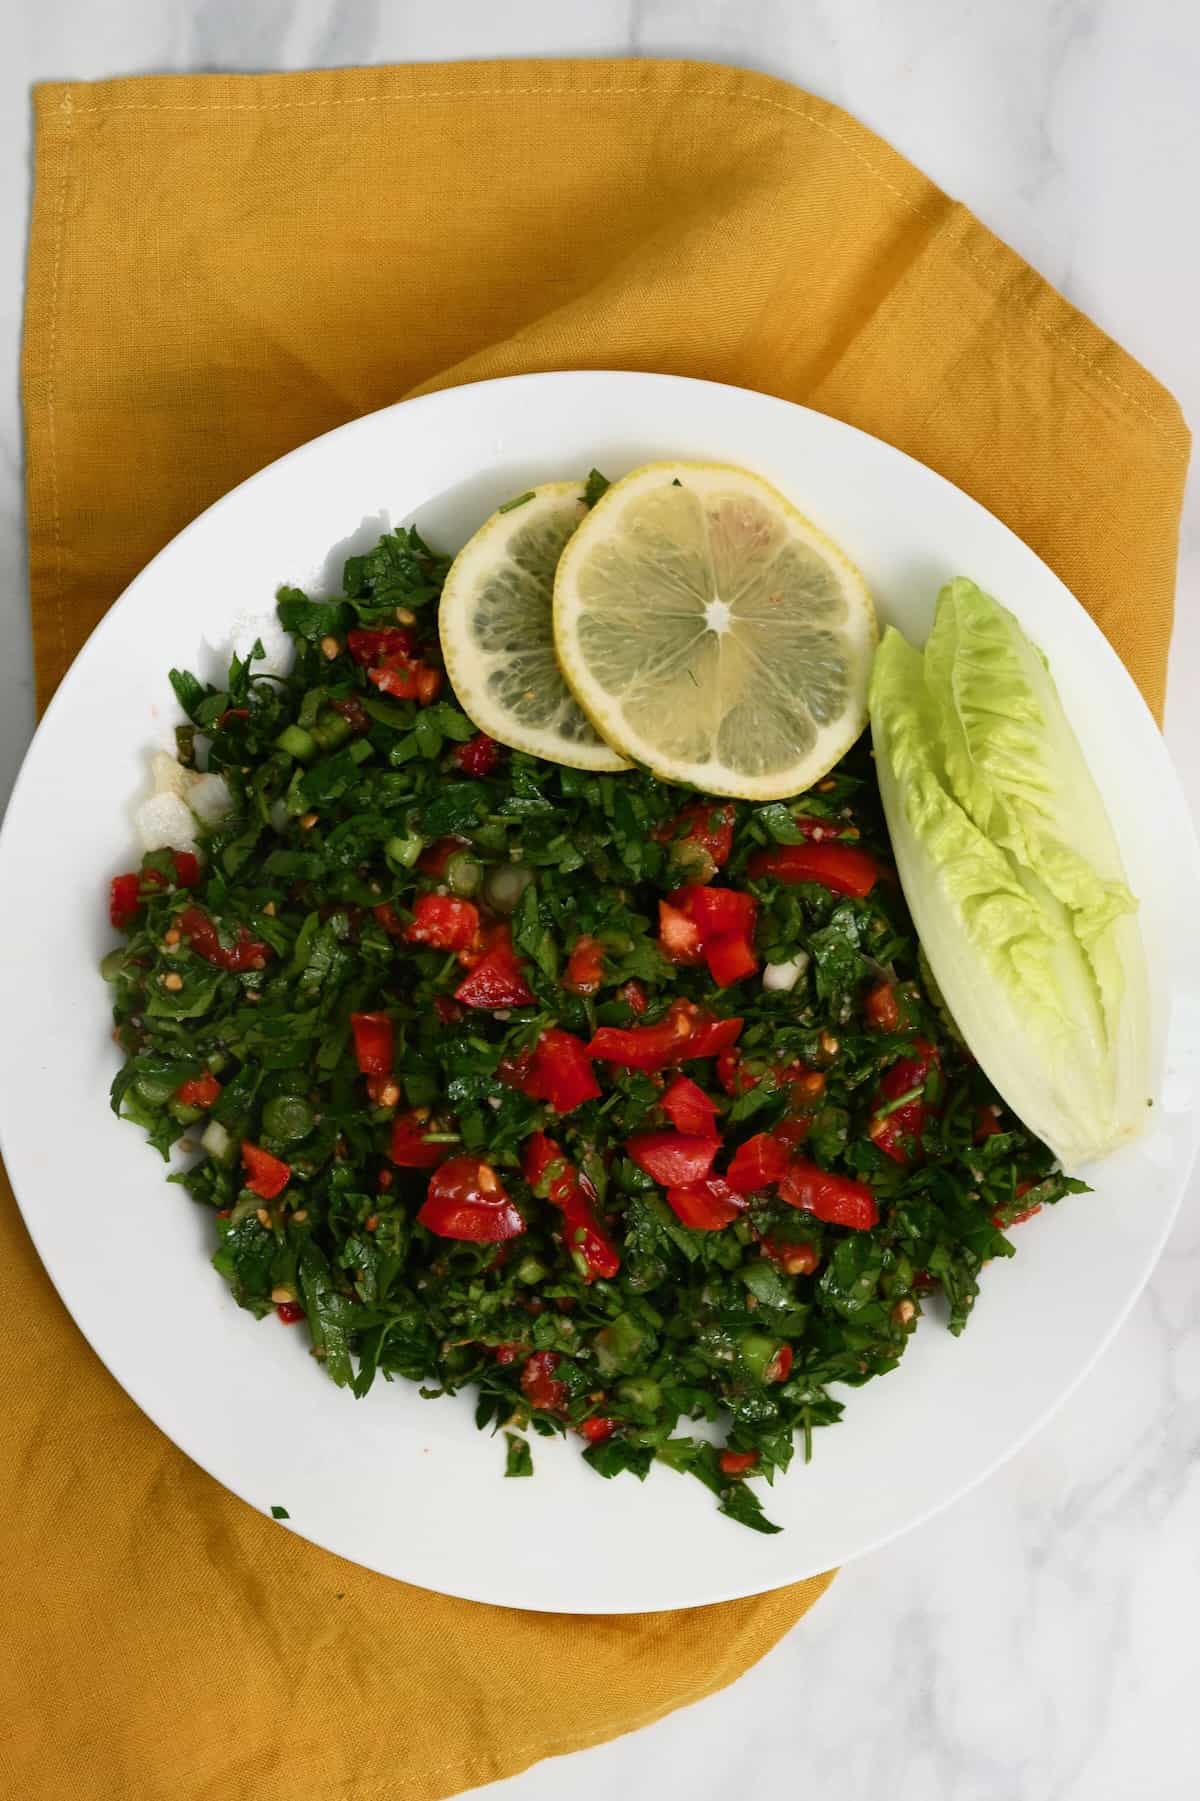 Tabbouleh served on a plate with lemon slices and lettuce